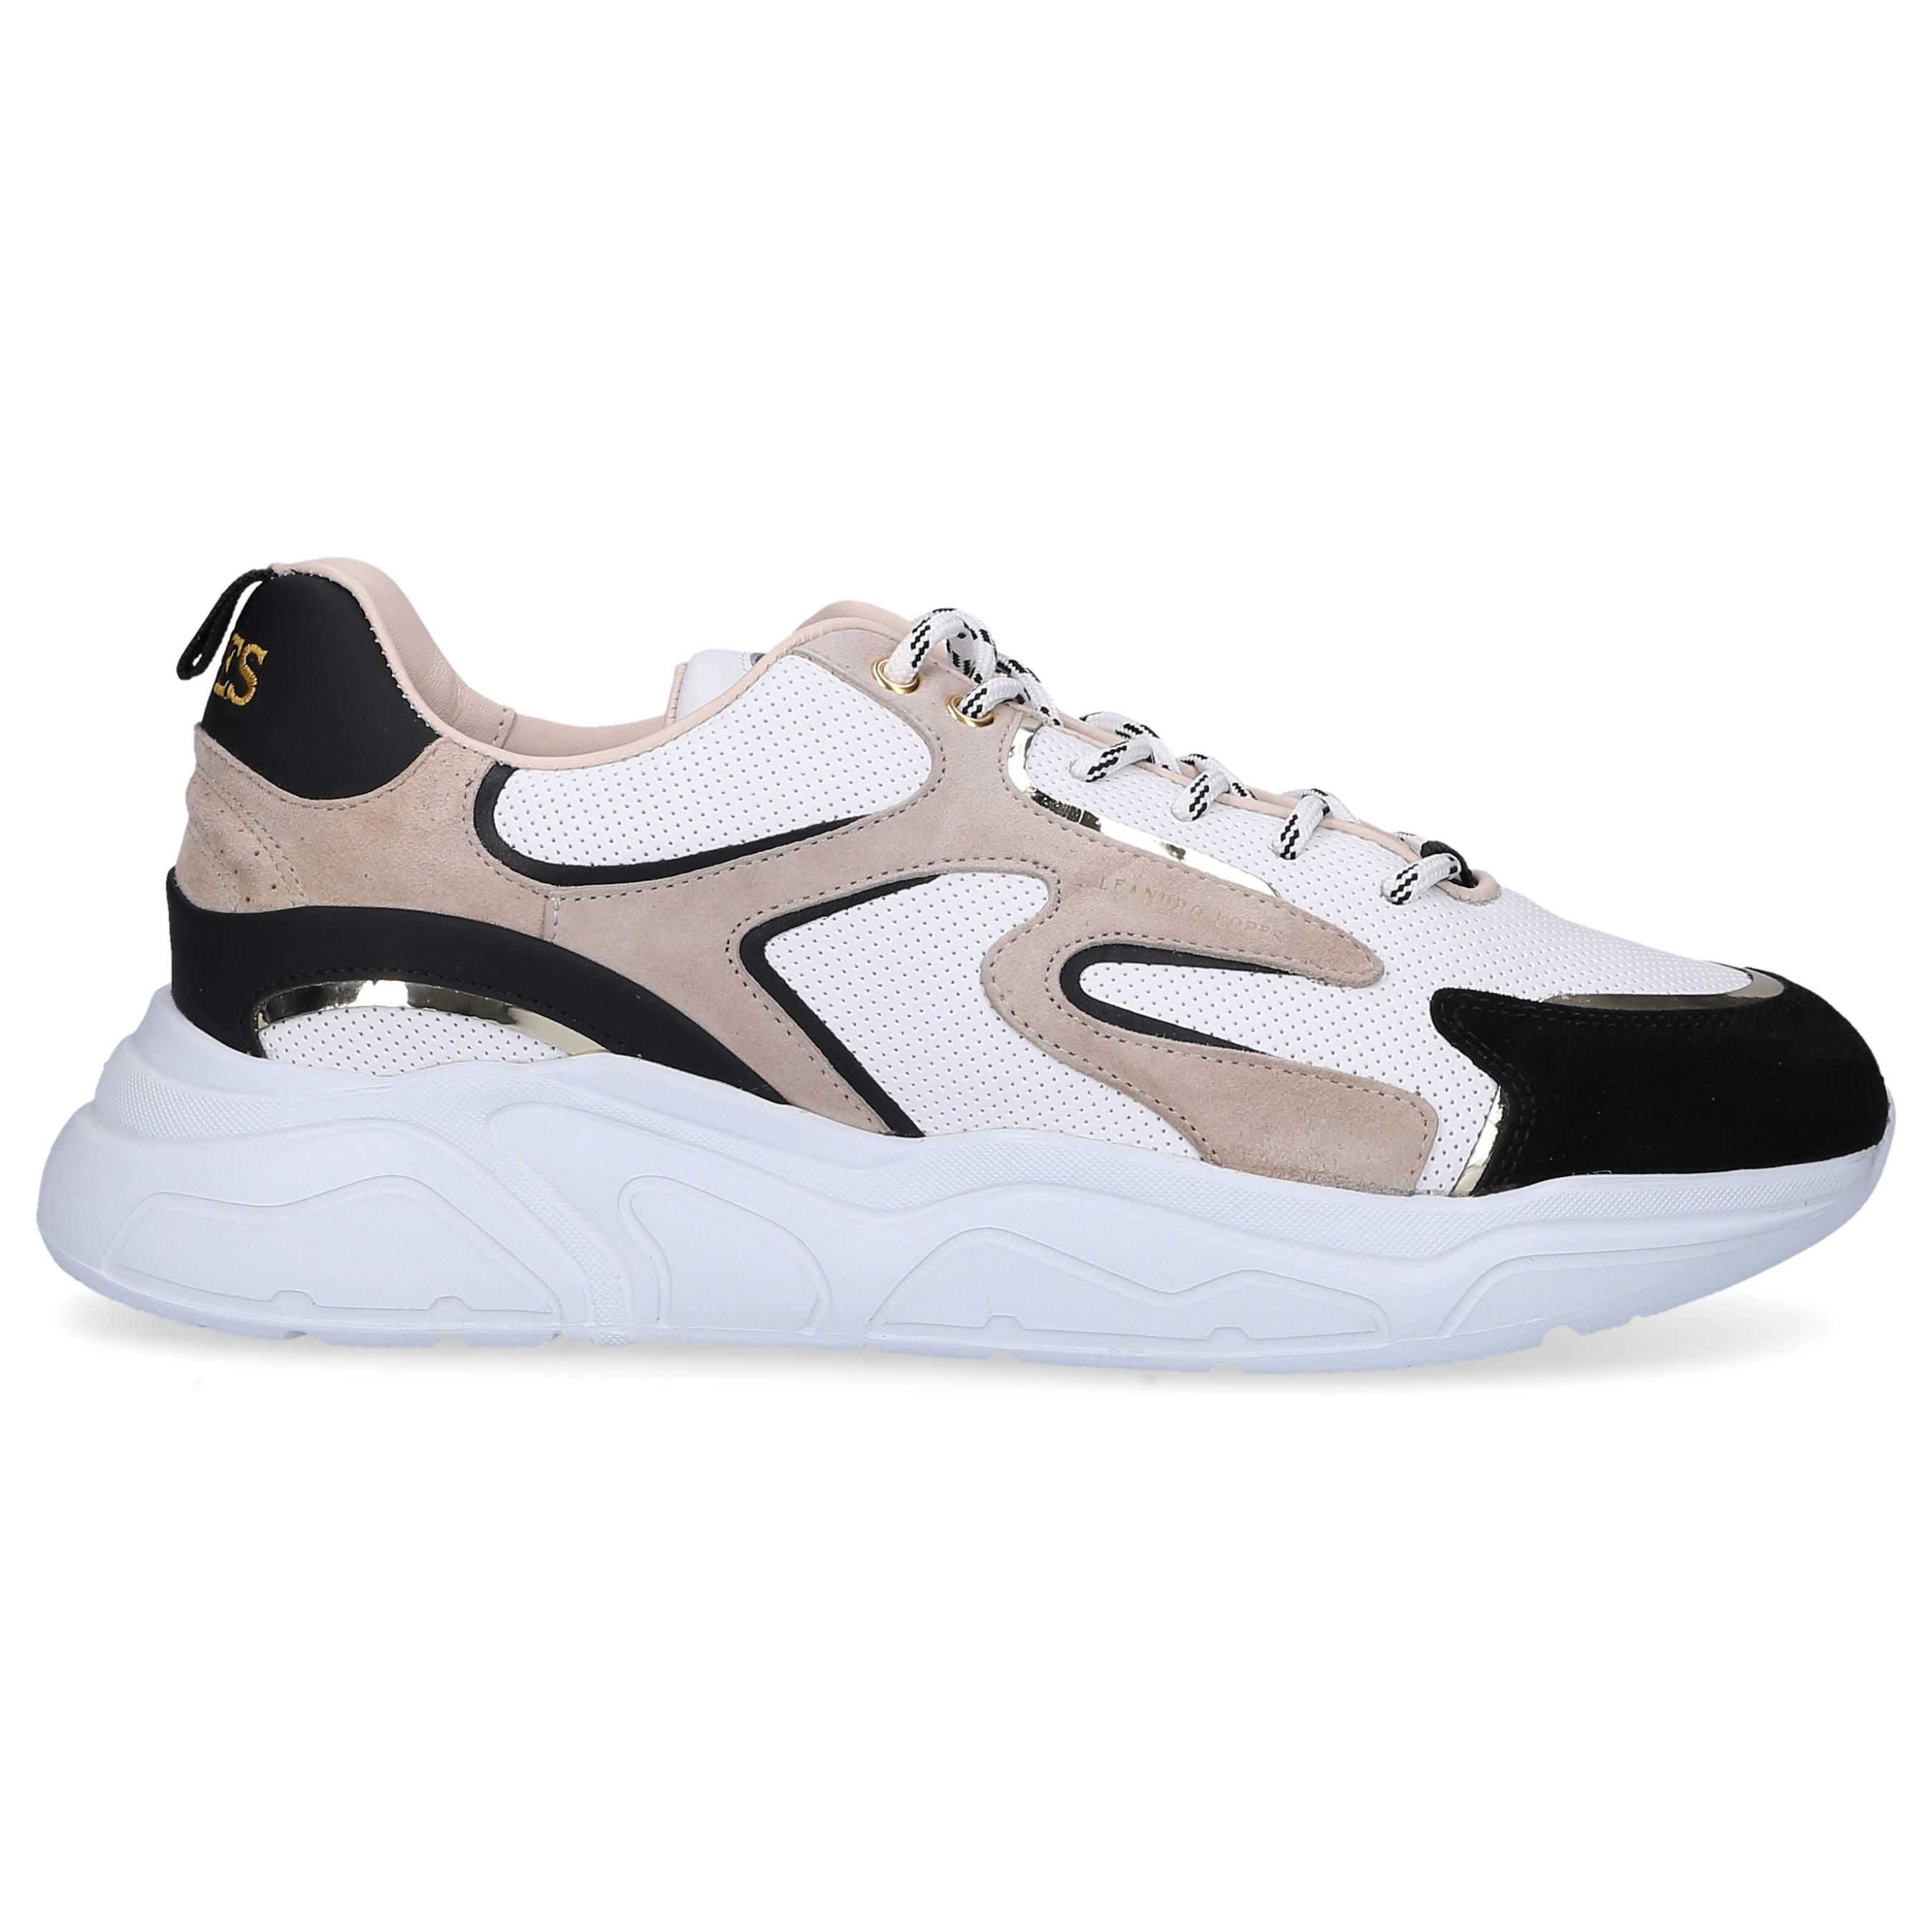 Leandro Lopes Leather Sneakers White Crafter for Men - Lyst